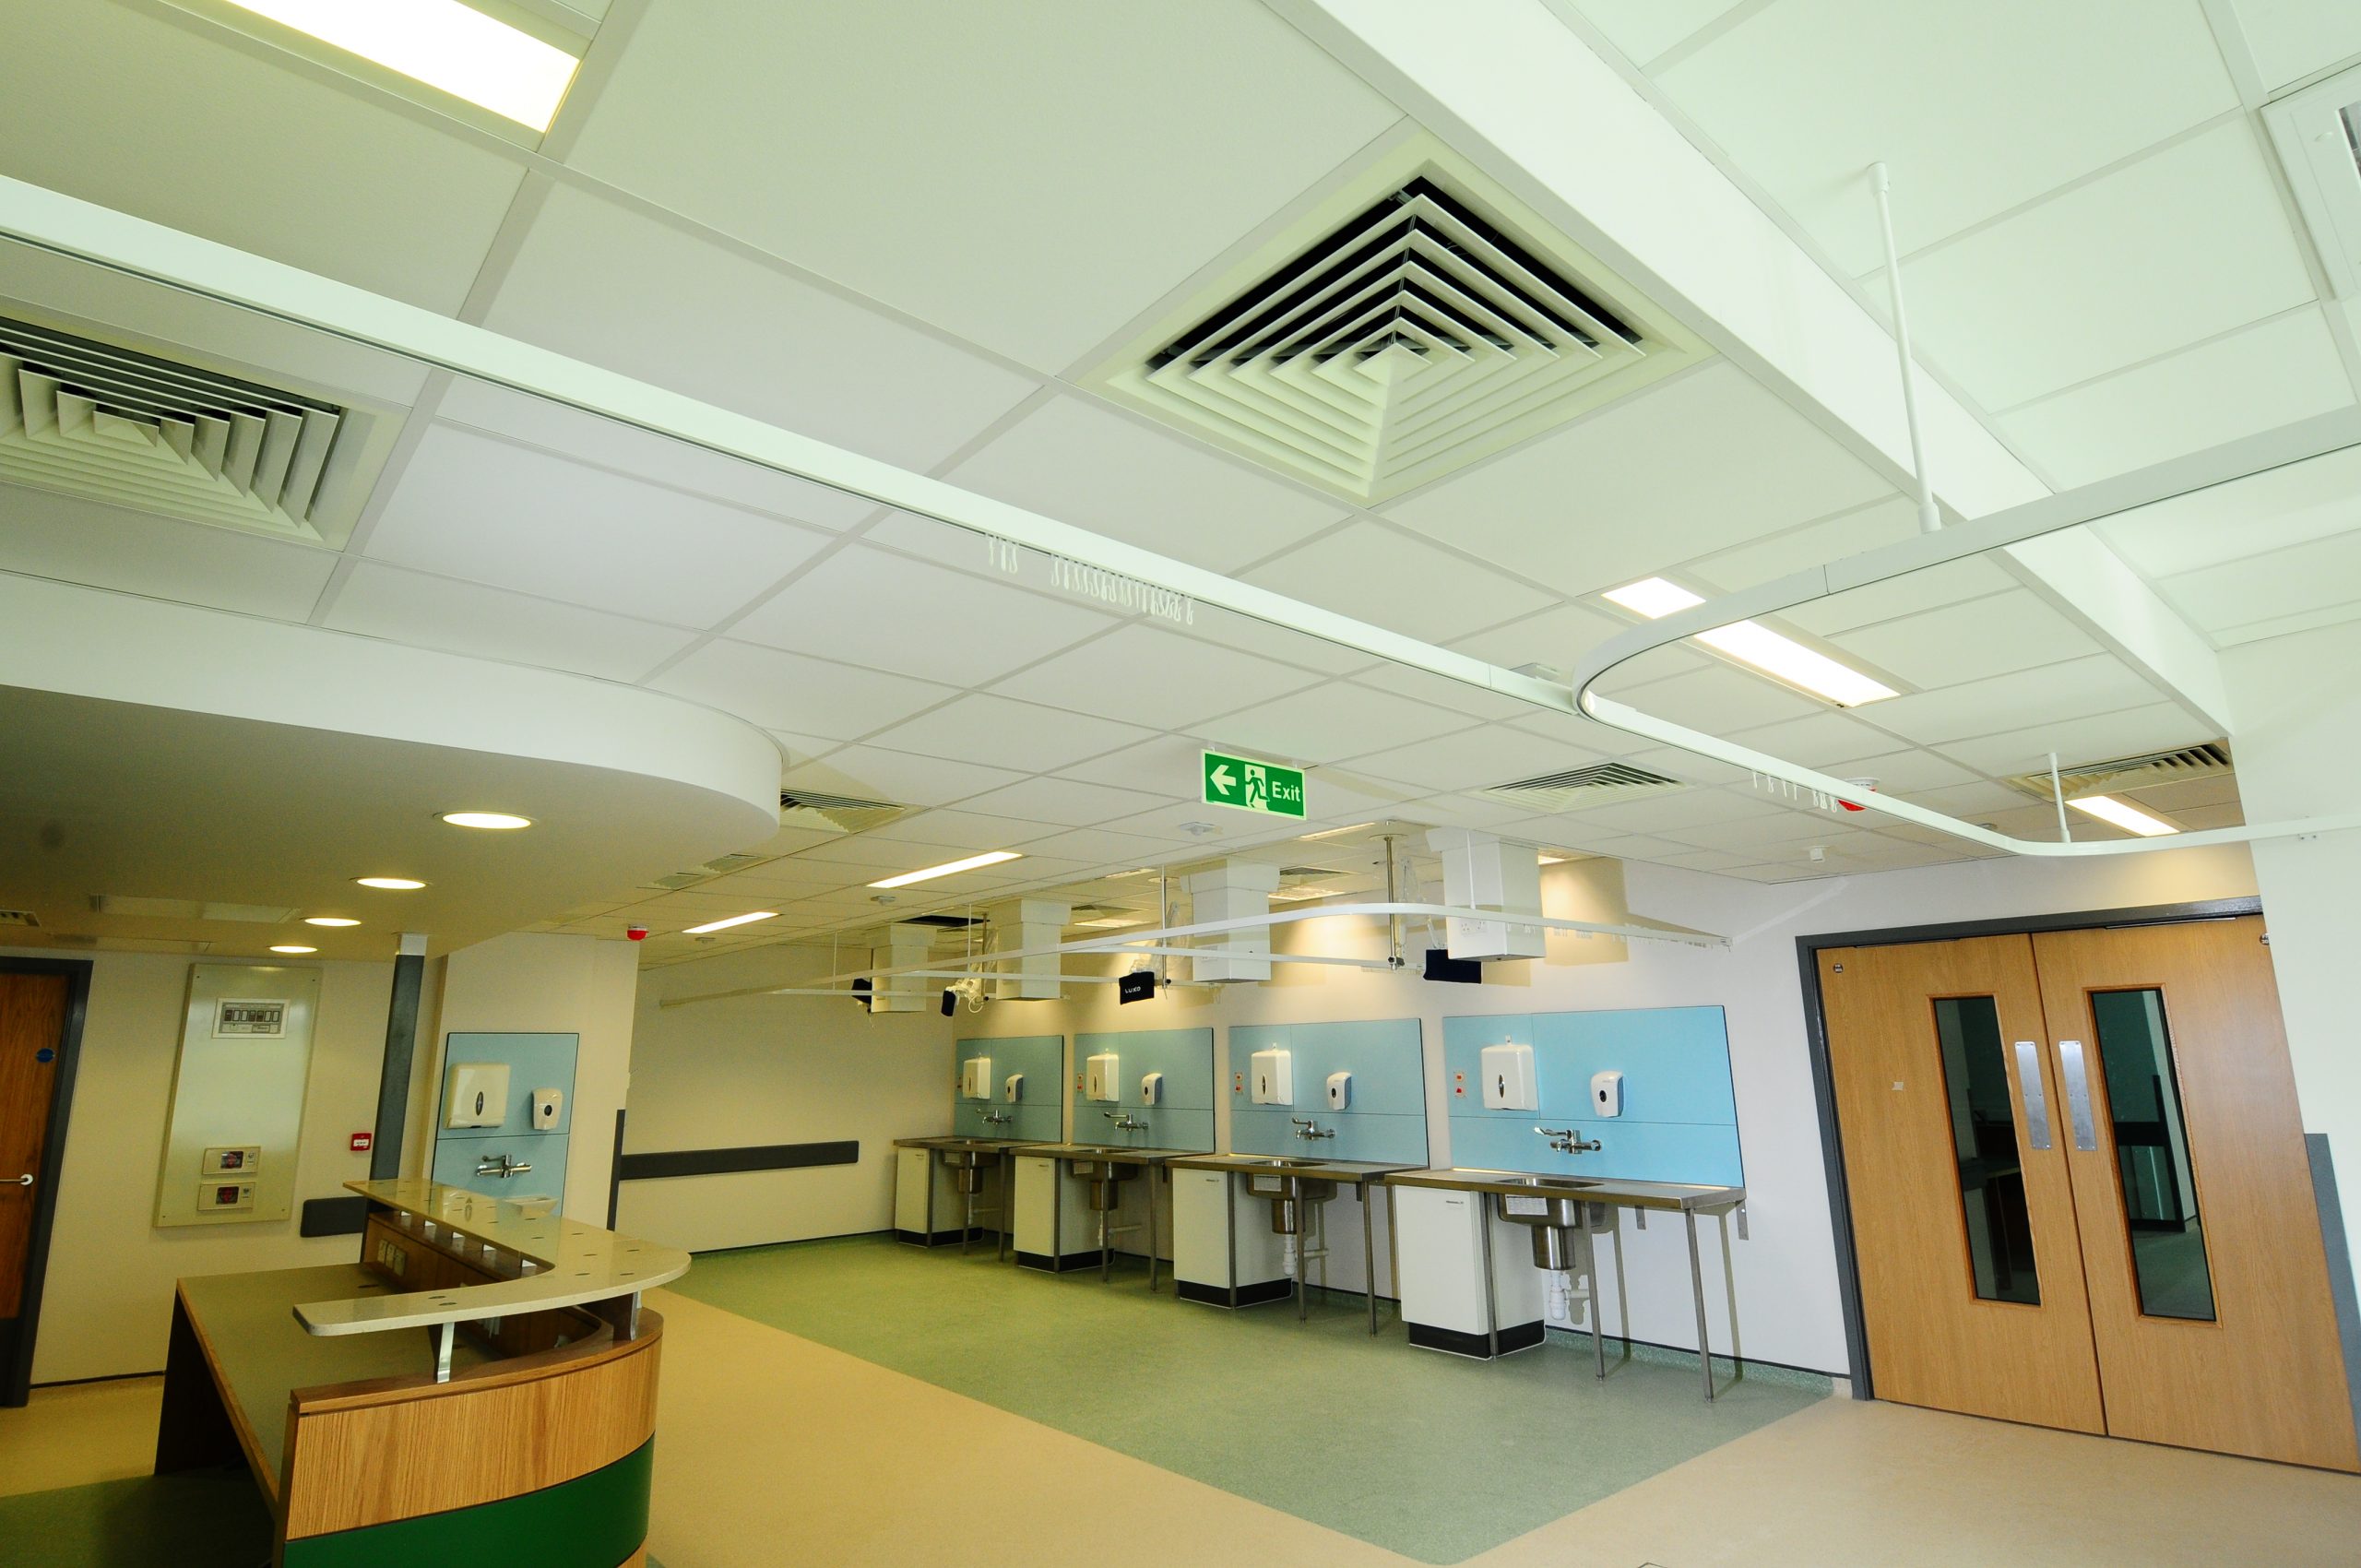 80,000m² of Zentia systems installed on Peterborough City Hospital